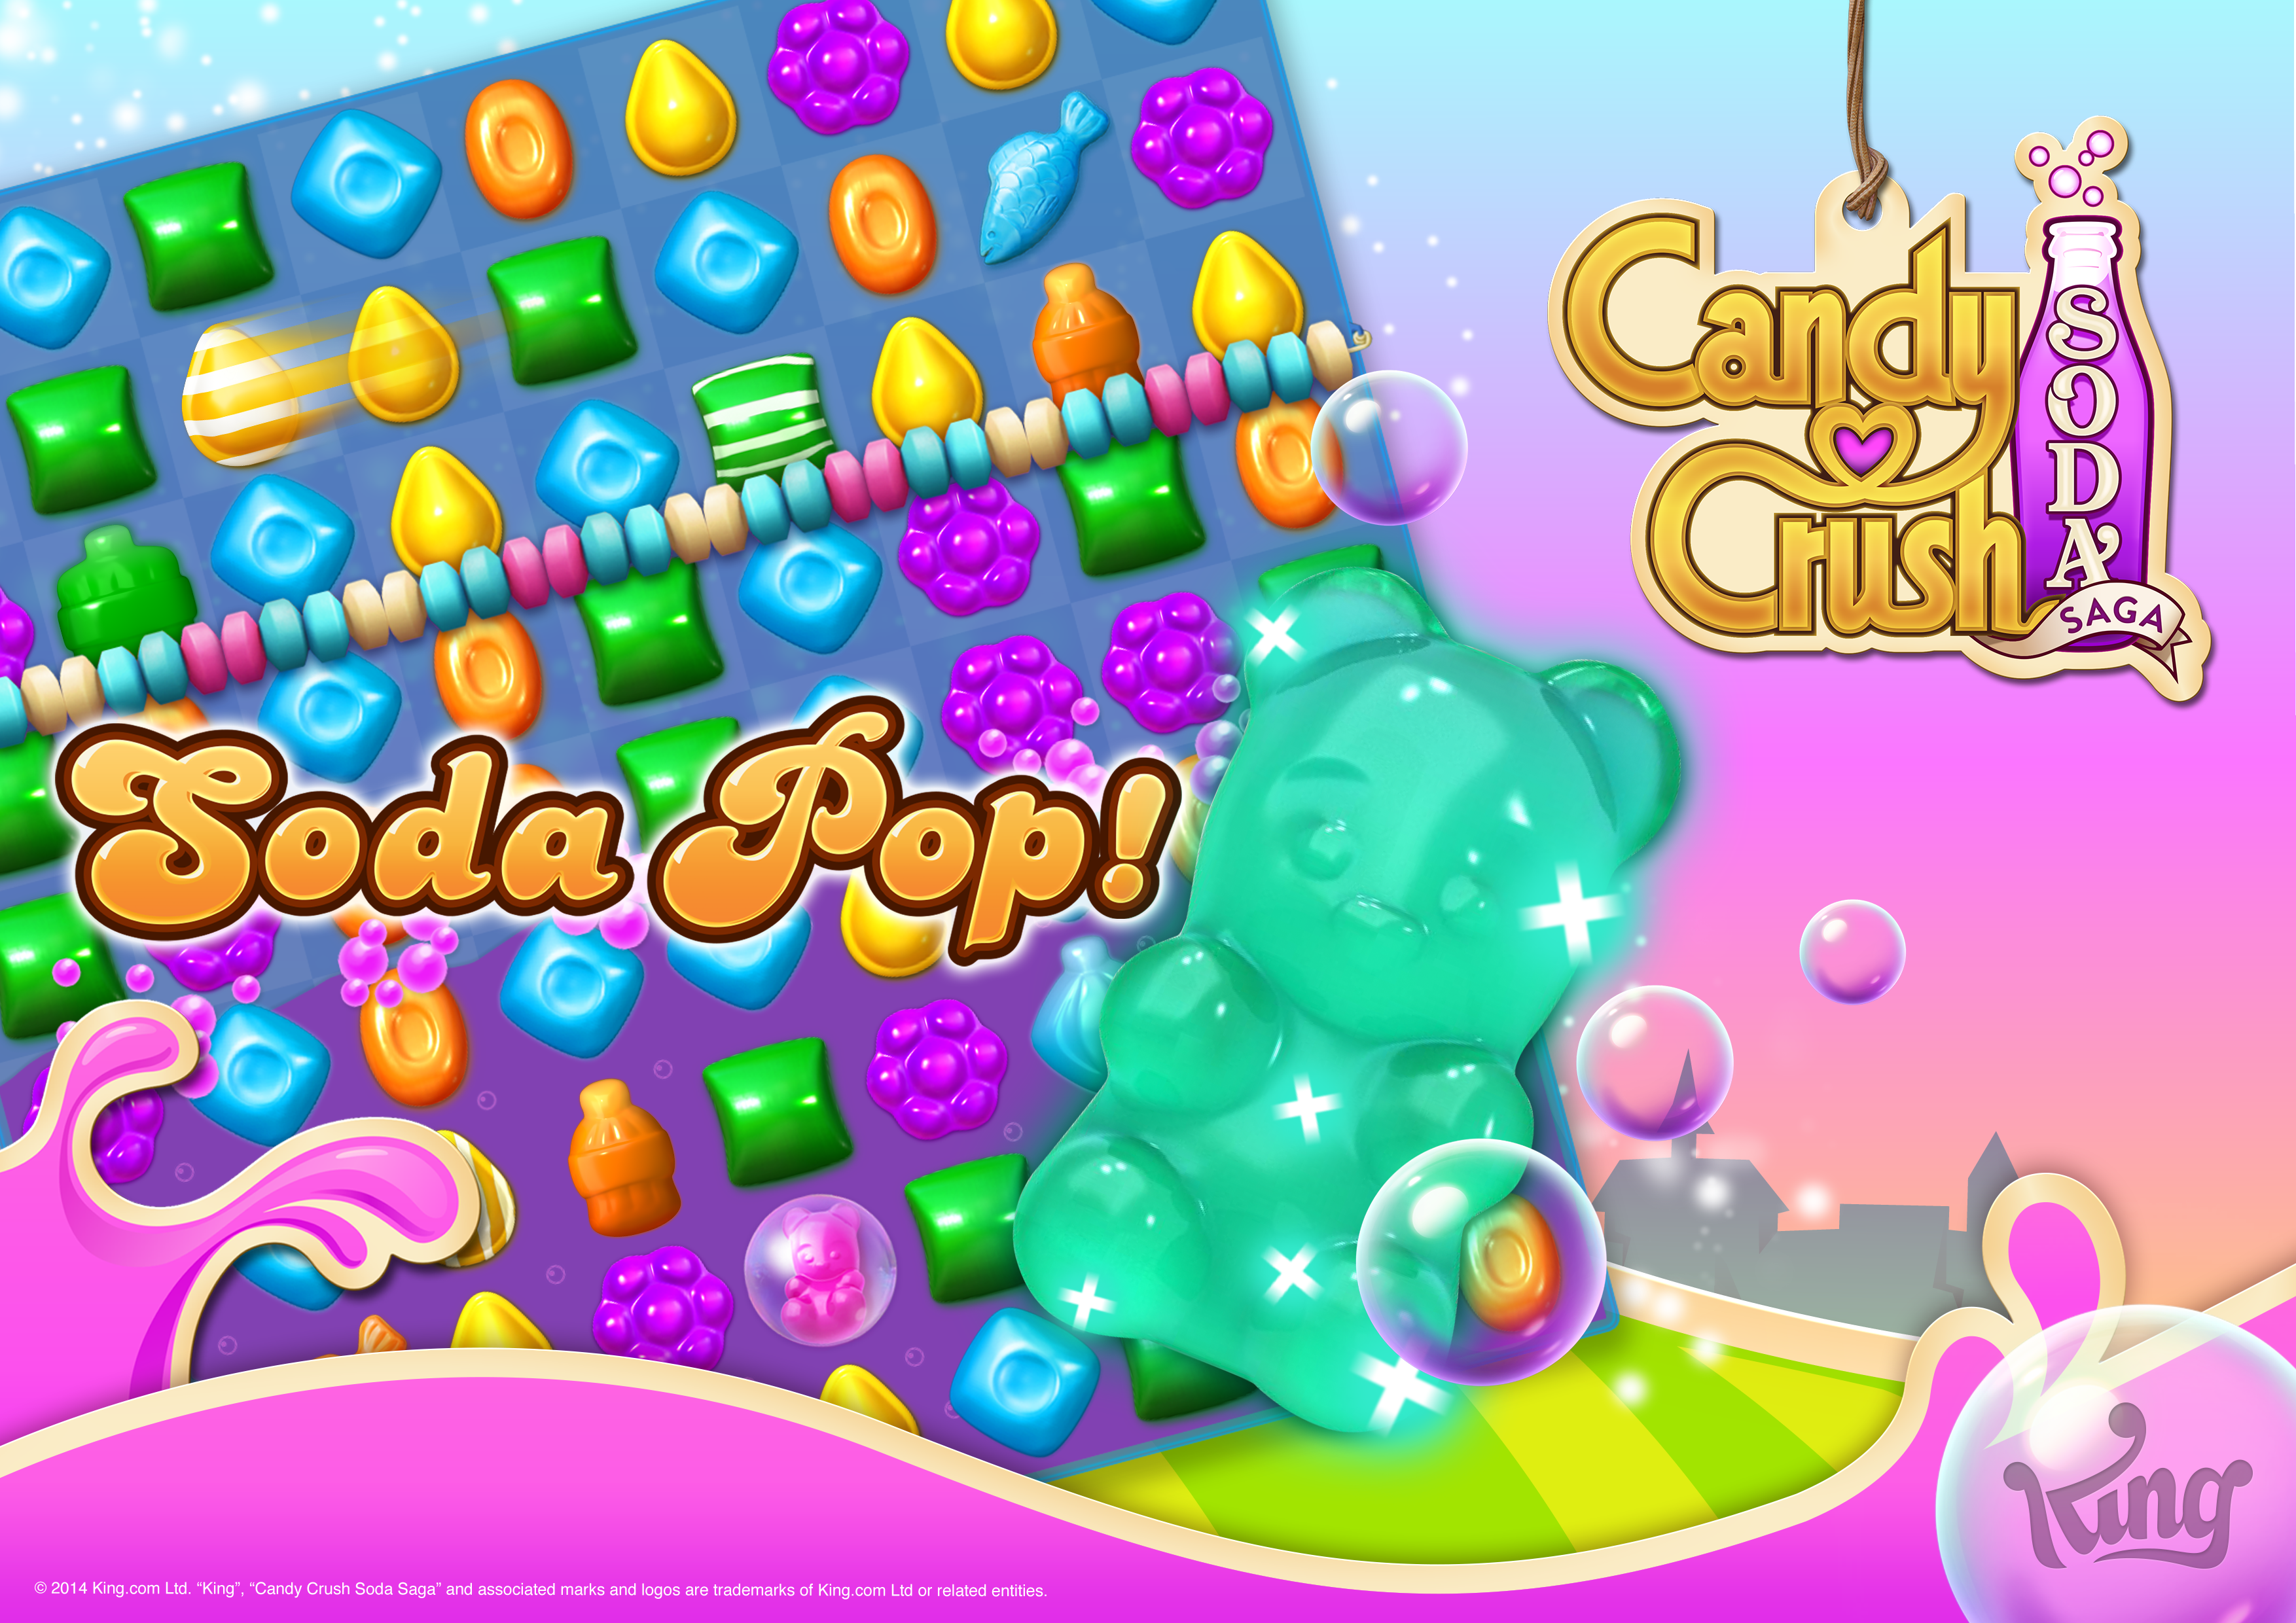 How to download Candy Crush Soda Saga for Android